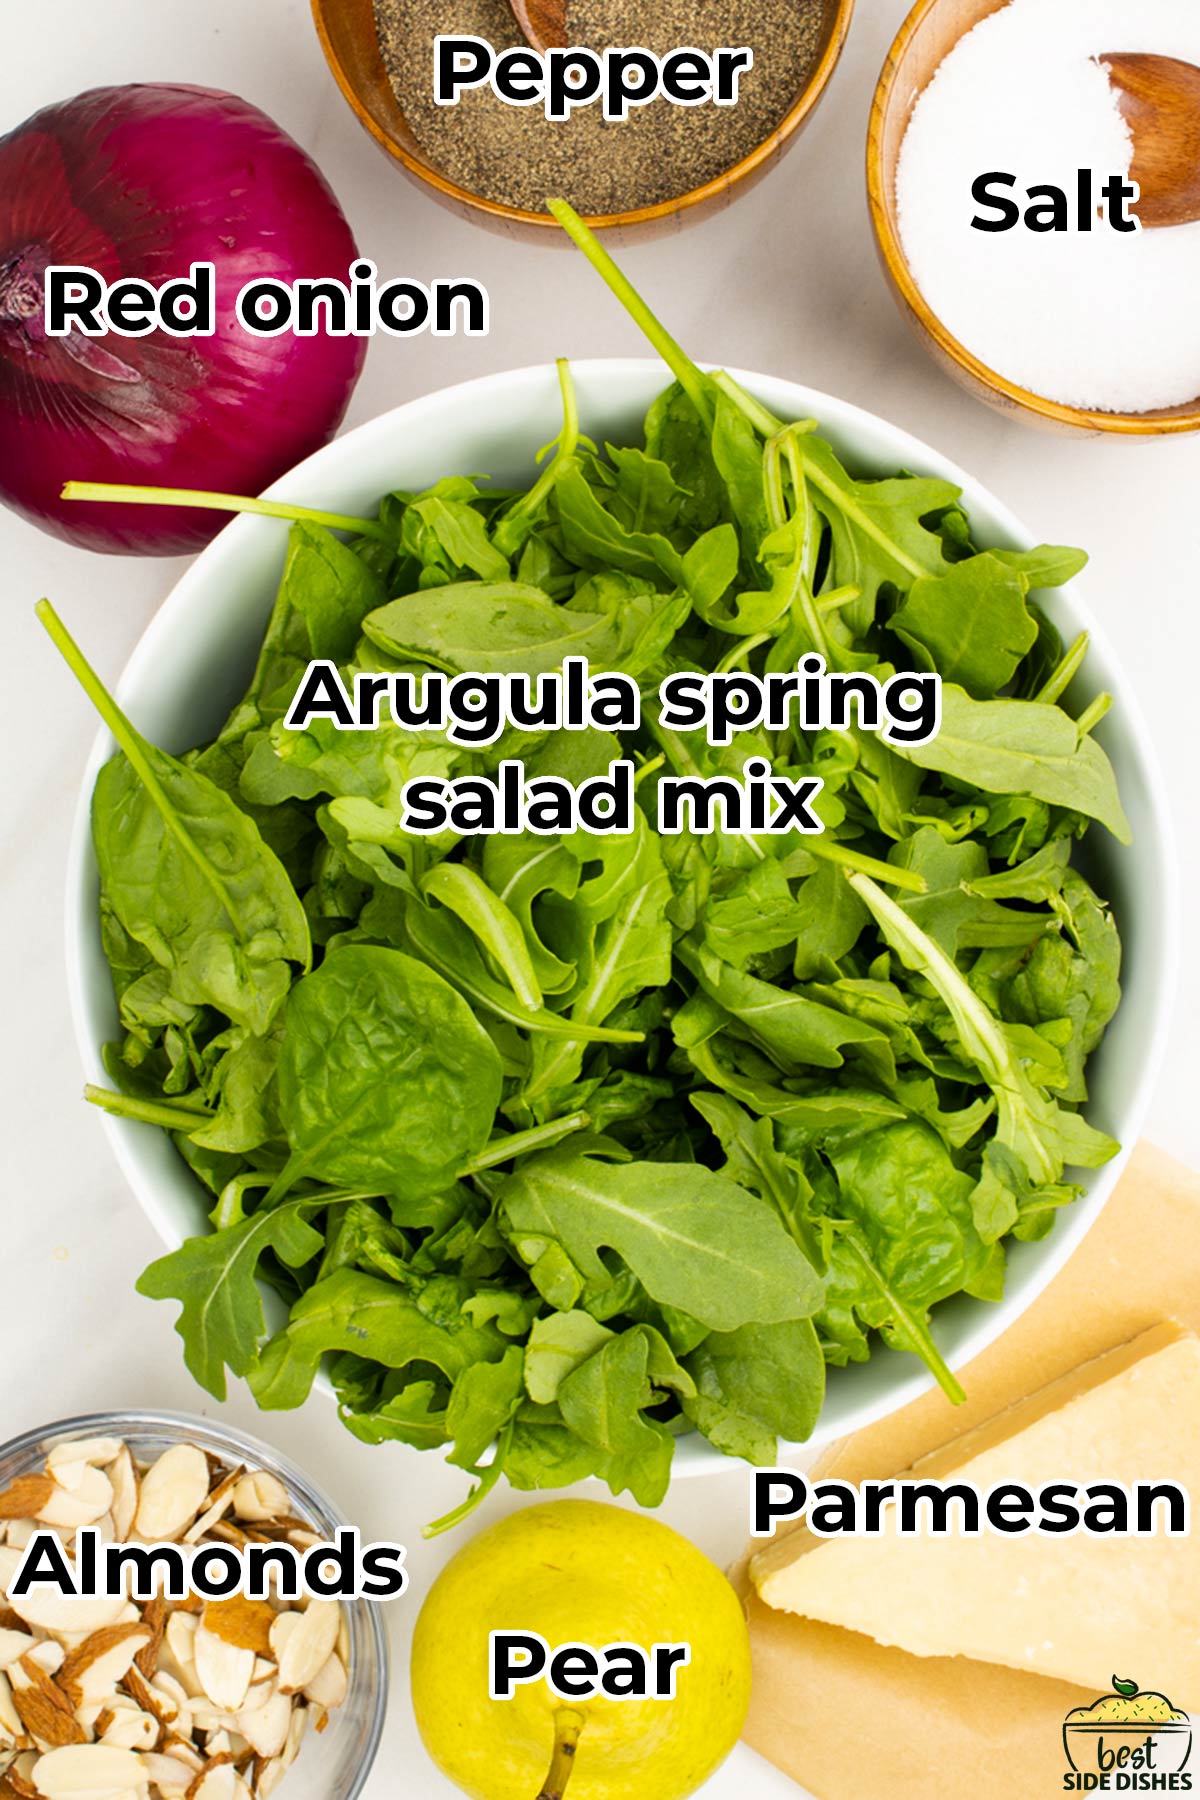 the ingredients for salad in separate bowls with labels